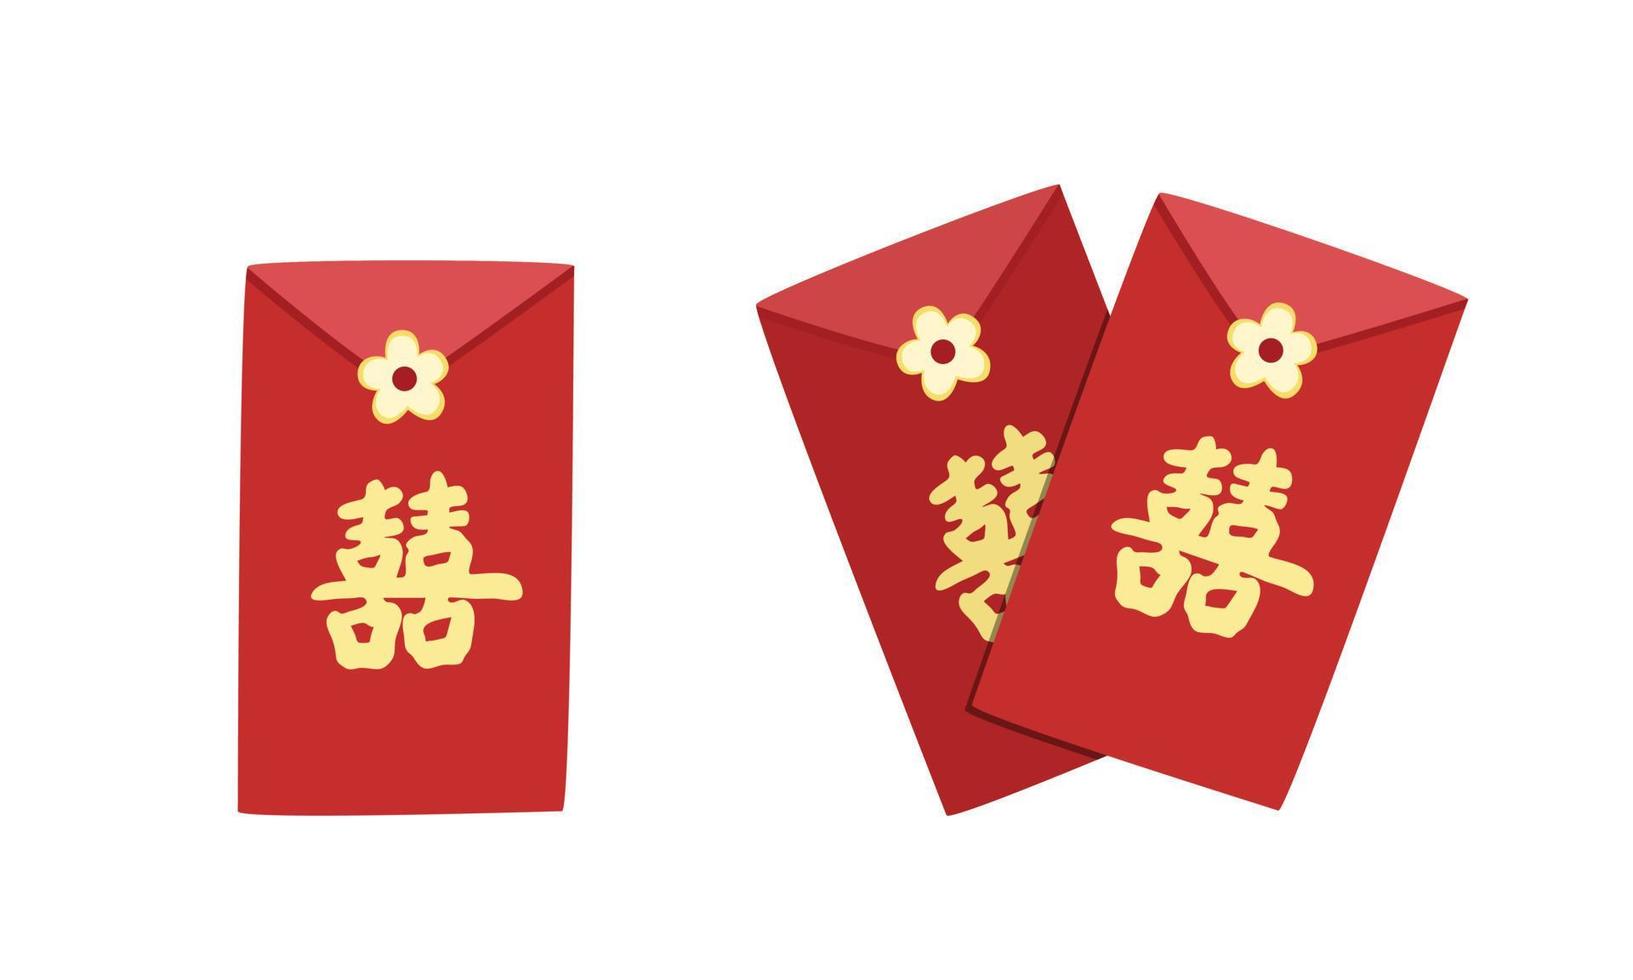 Vietnamese wedding red envelope clipart. Vietnam wedding lucky money in red envelopes flat vector illustration. Vietnamese traditional wedding ceremony concept. Chinese text Double Happiness